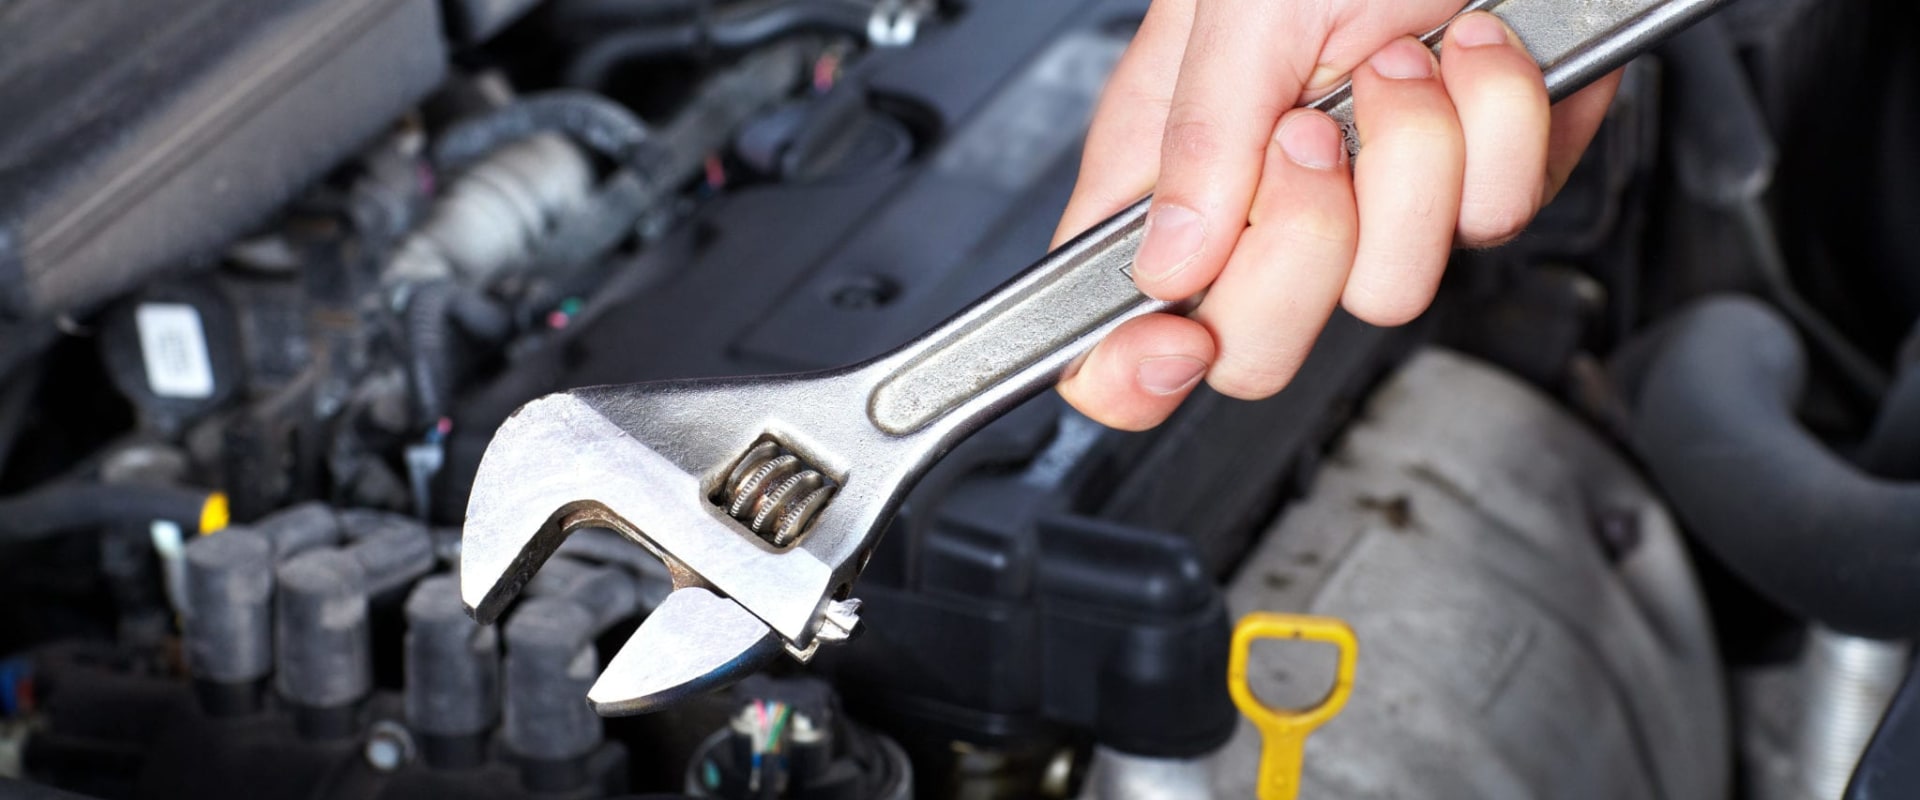 How to Save Money on Automotive Maintenance and Repair